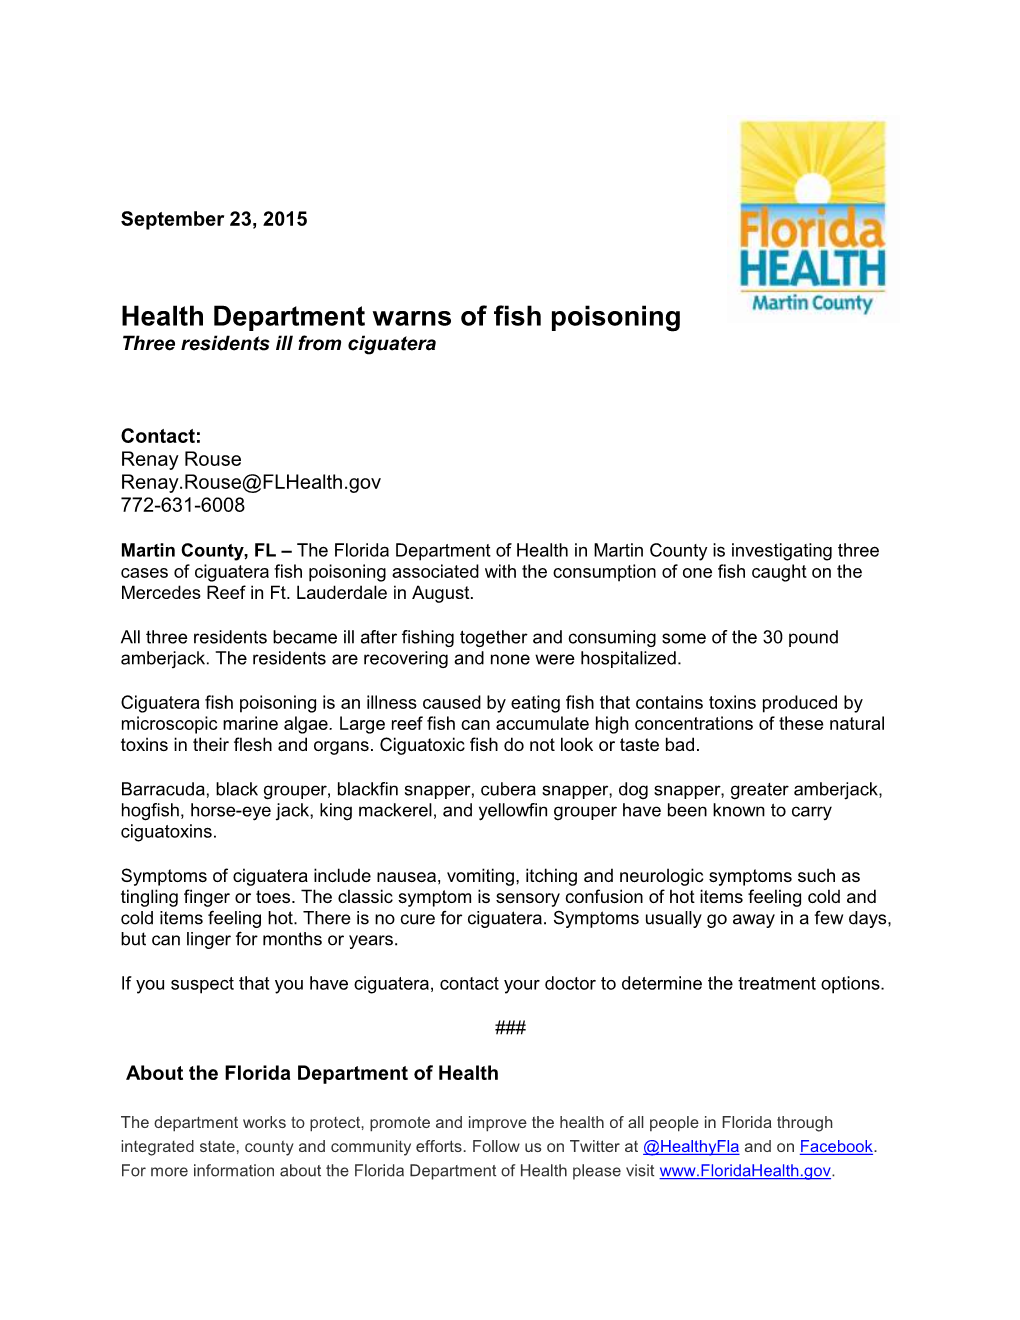 Health Department Warns of Fish Poisoning Three Residents Ill from Ciguatera